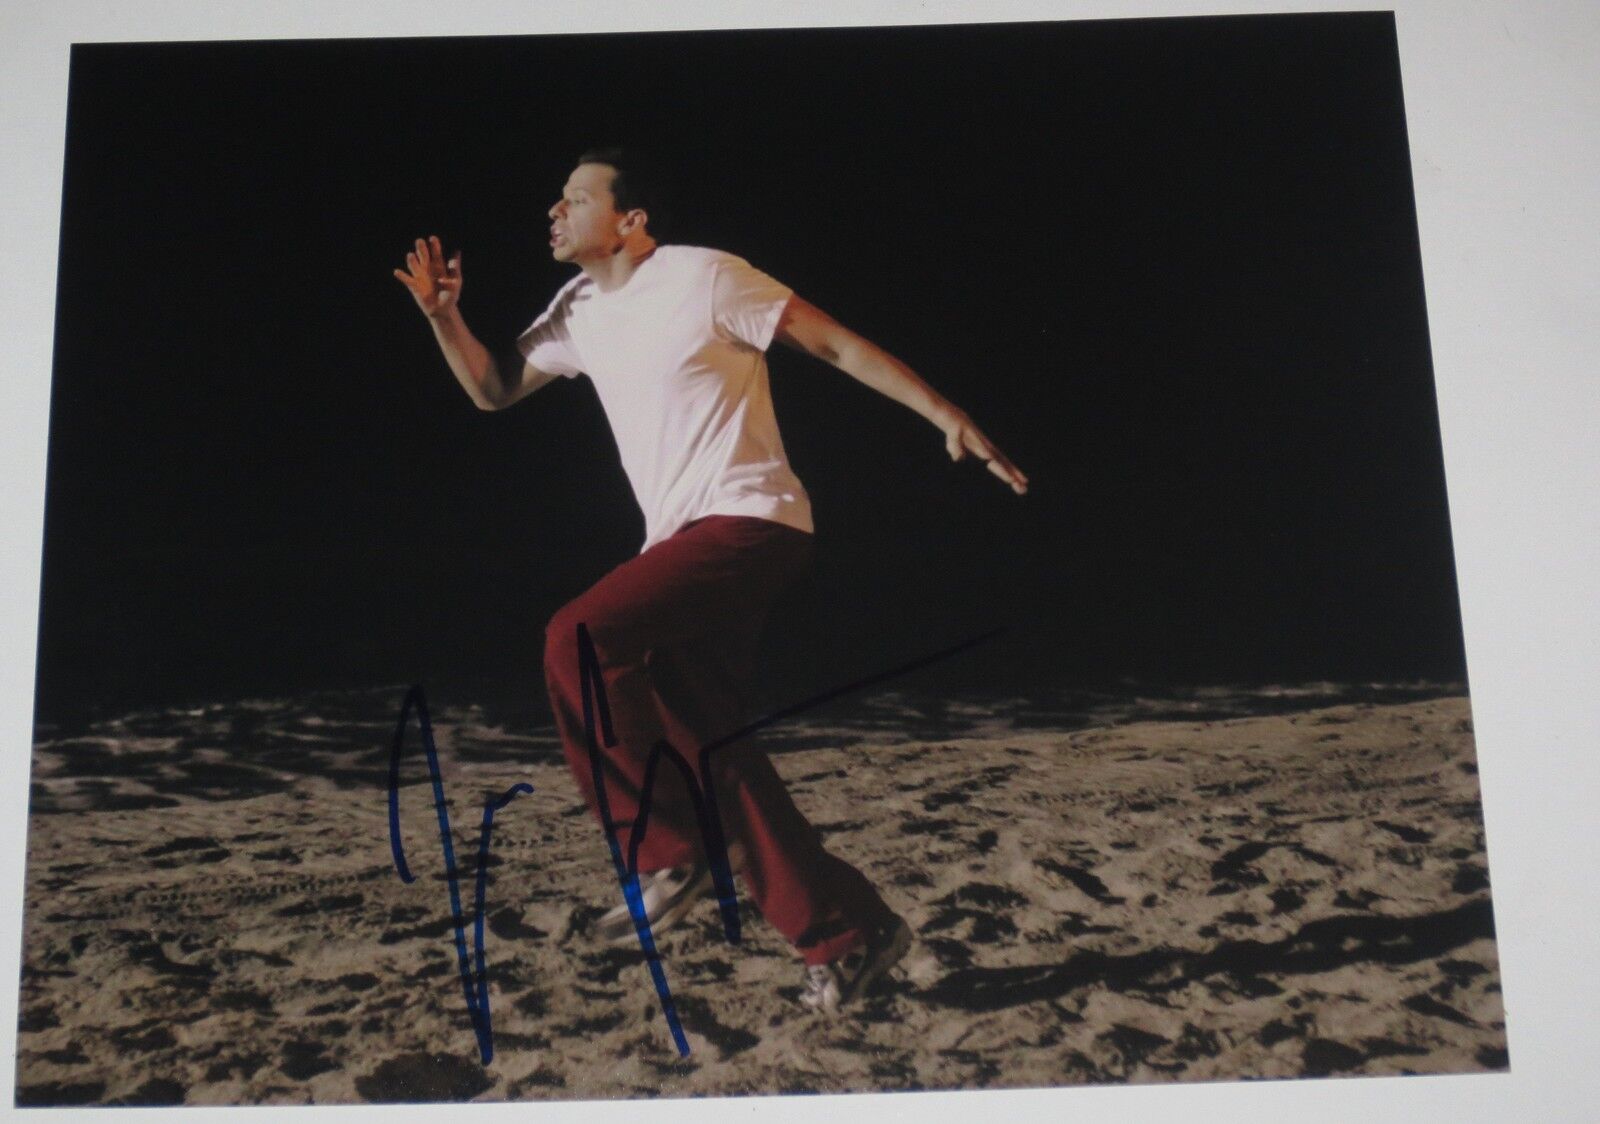 JON CRYER SIGNED 8X10 PHOTO AUTOGRAPH CBS TWO AND A HALF MEN COA D